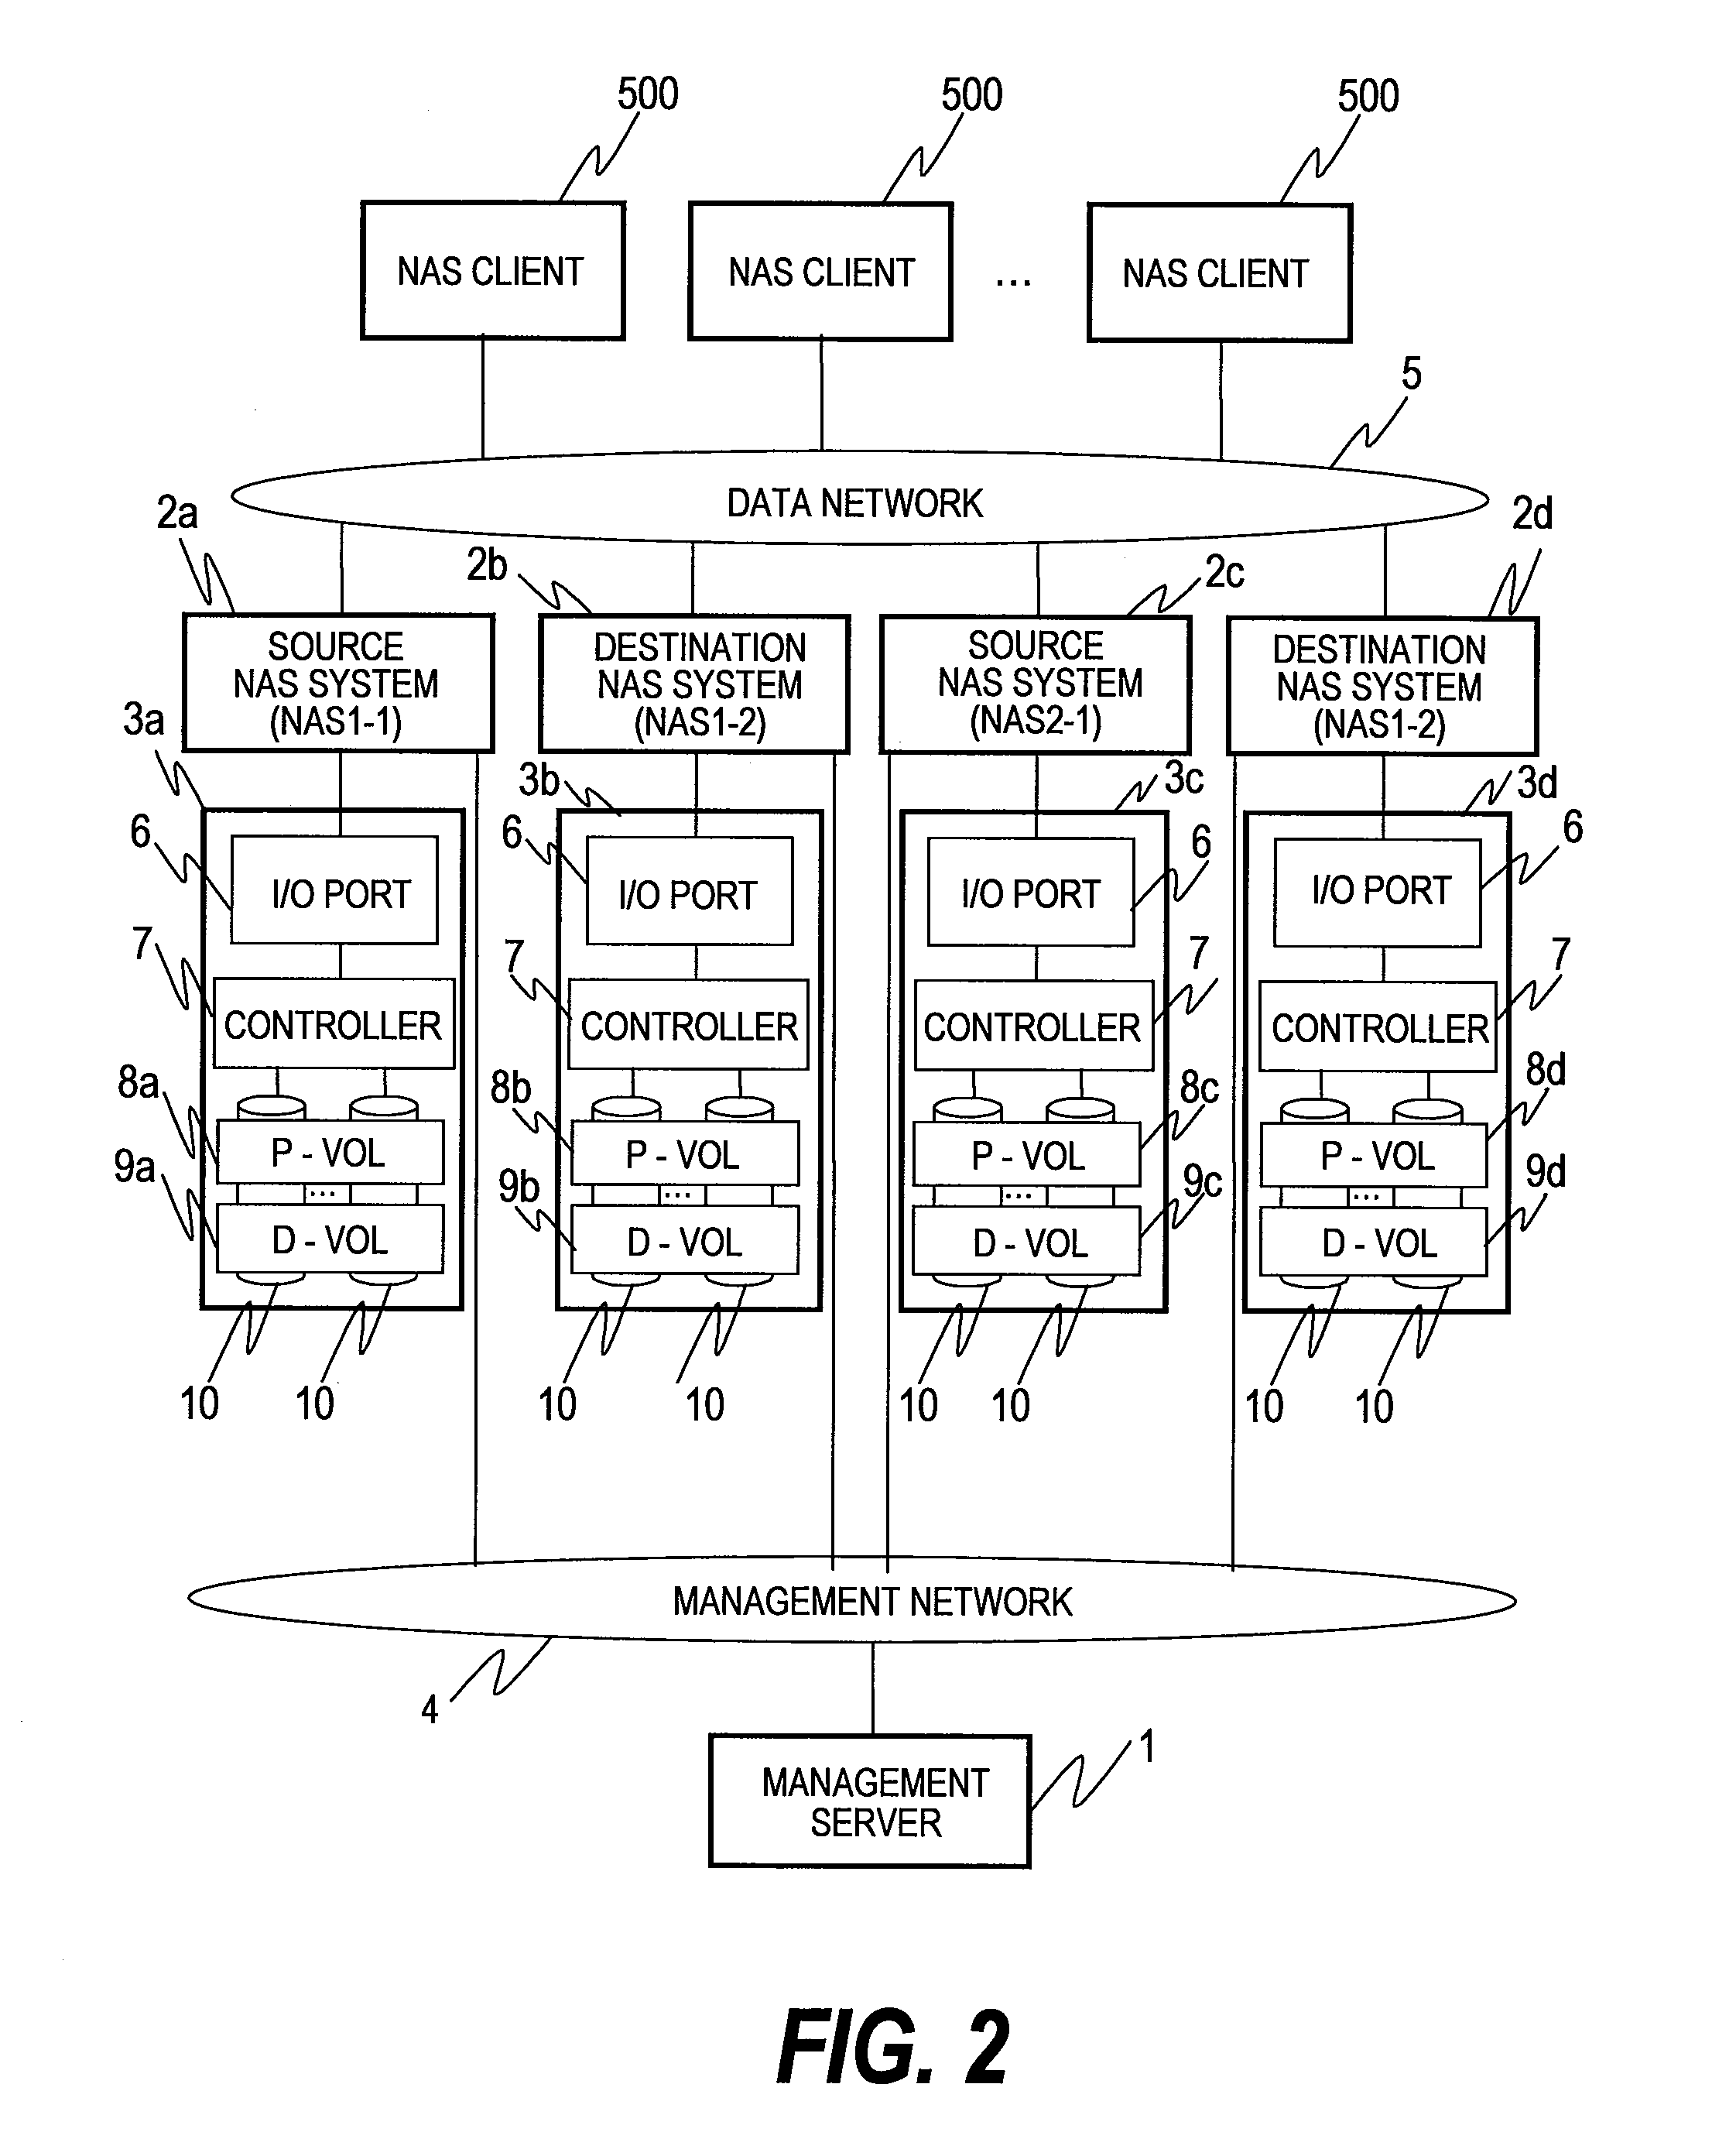 Data recovery method in differential remote backup for a NAS system